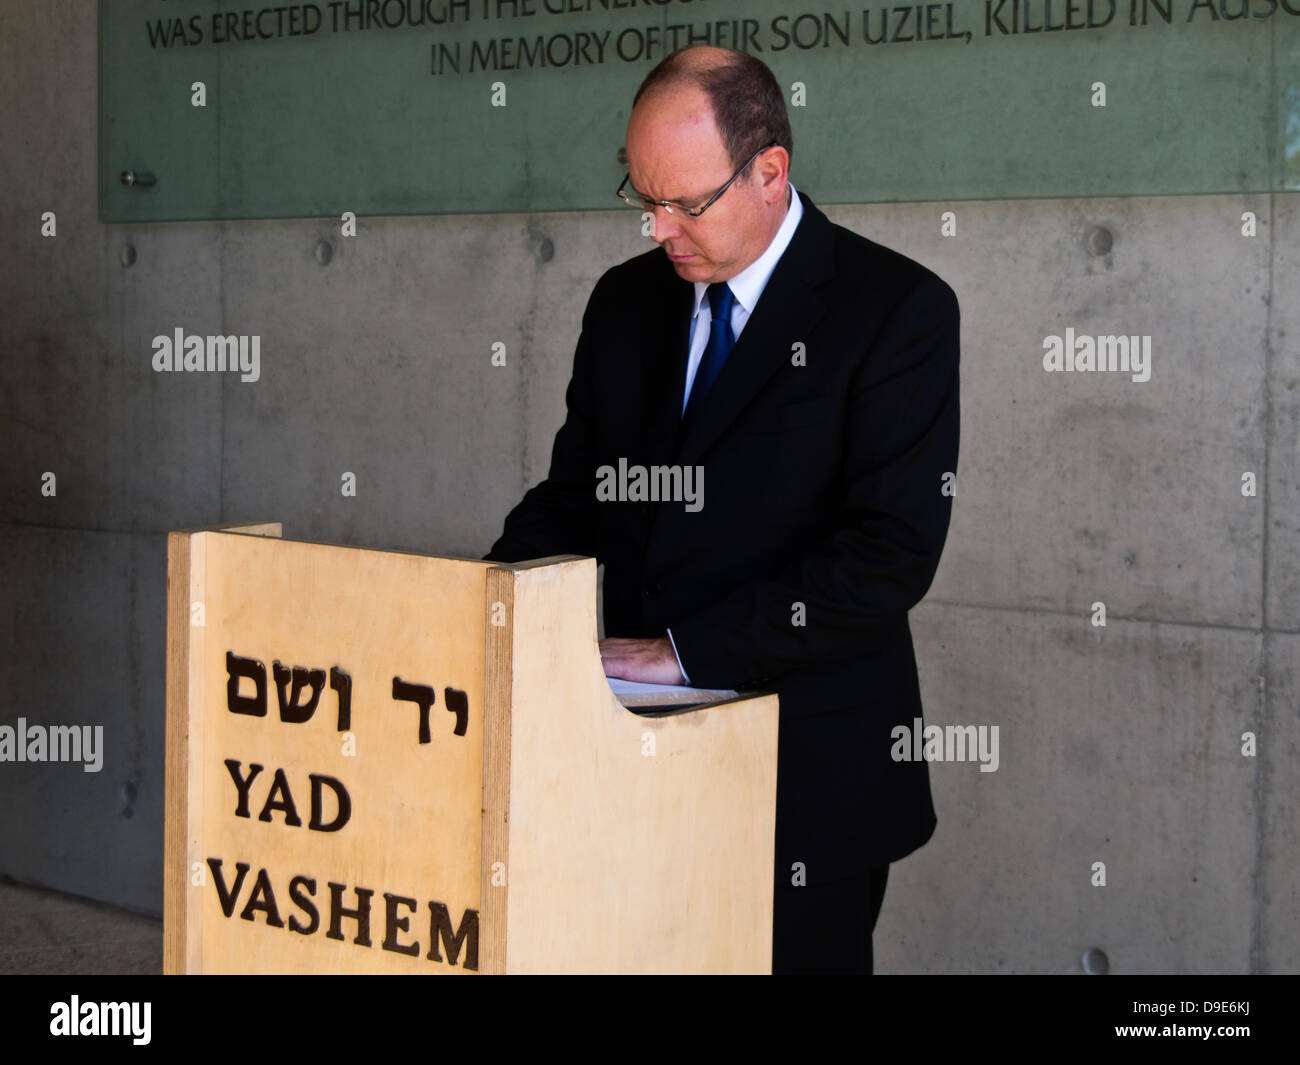 erusalem, Israel. 18-June-2013. PRINCE ALBERT II, signs the guestbook concluding his visit to Yad Vashem Holocaust Museum. Jerusalem, Israel. 18-June-2013.  Prince Albert II, reigning monarch of the Principality of Monaco, visits Yad Vashem Holocaust Museum. Prince Albert II will be taking part in the upcoming Facing Tomorrow - Israeli Presidential Conference. Credit:  Nir Alon/Alamy Live News Stock Photo